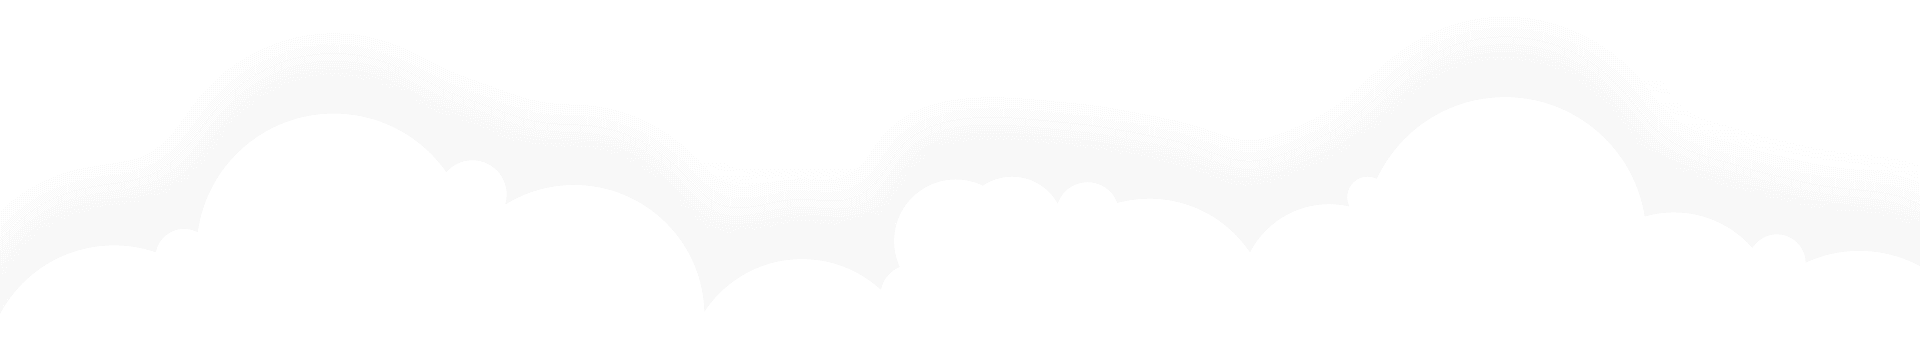 animated clouds for the website background